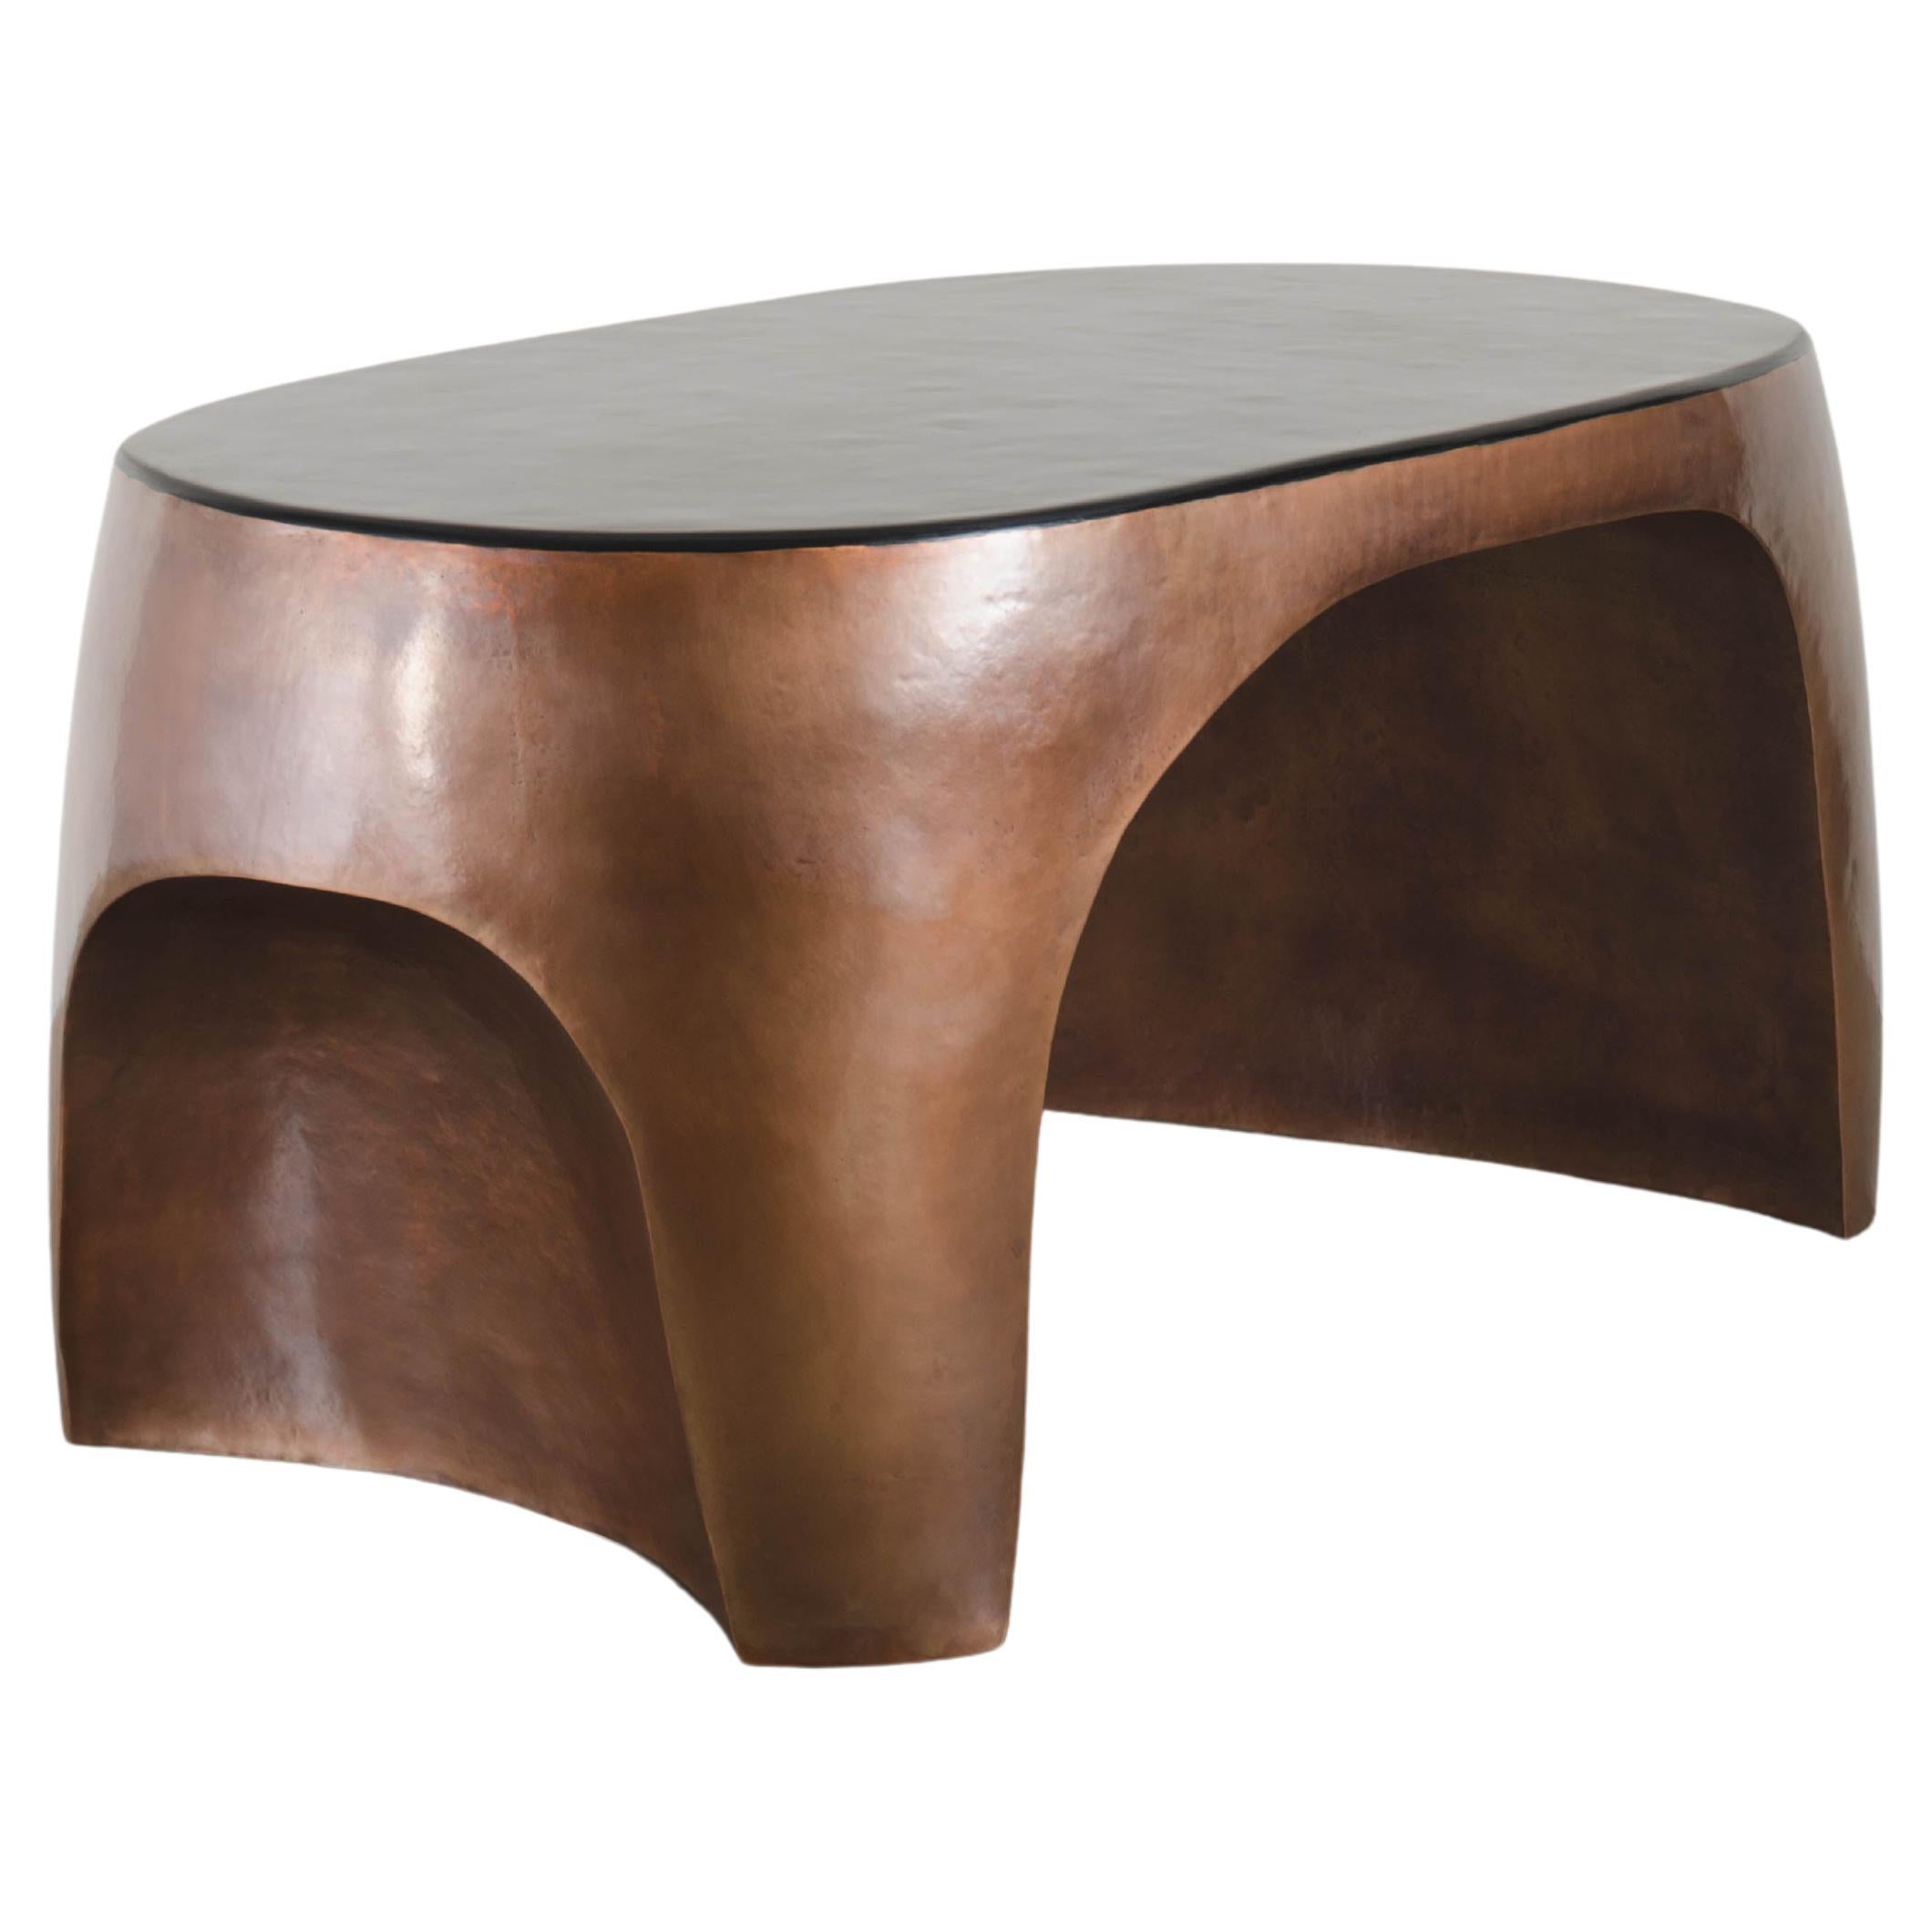 Robert Kuo Repousse Curve Desk Table in Antique Copper and Black Lacquer